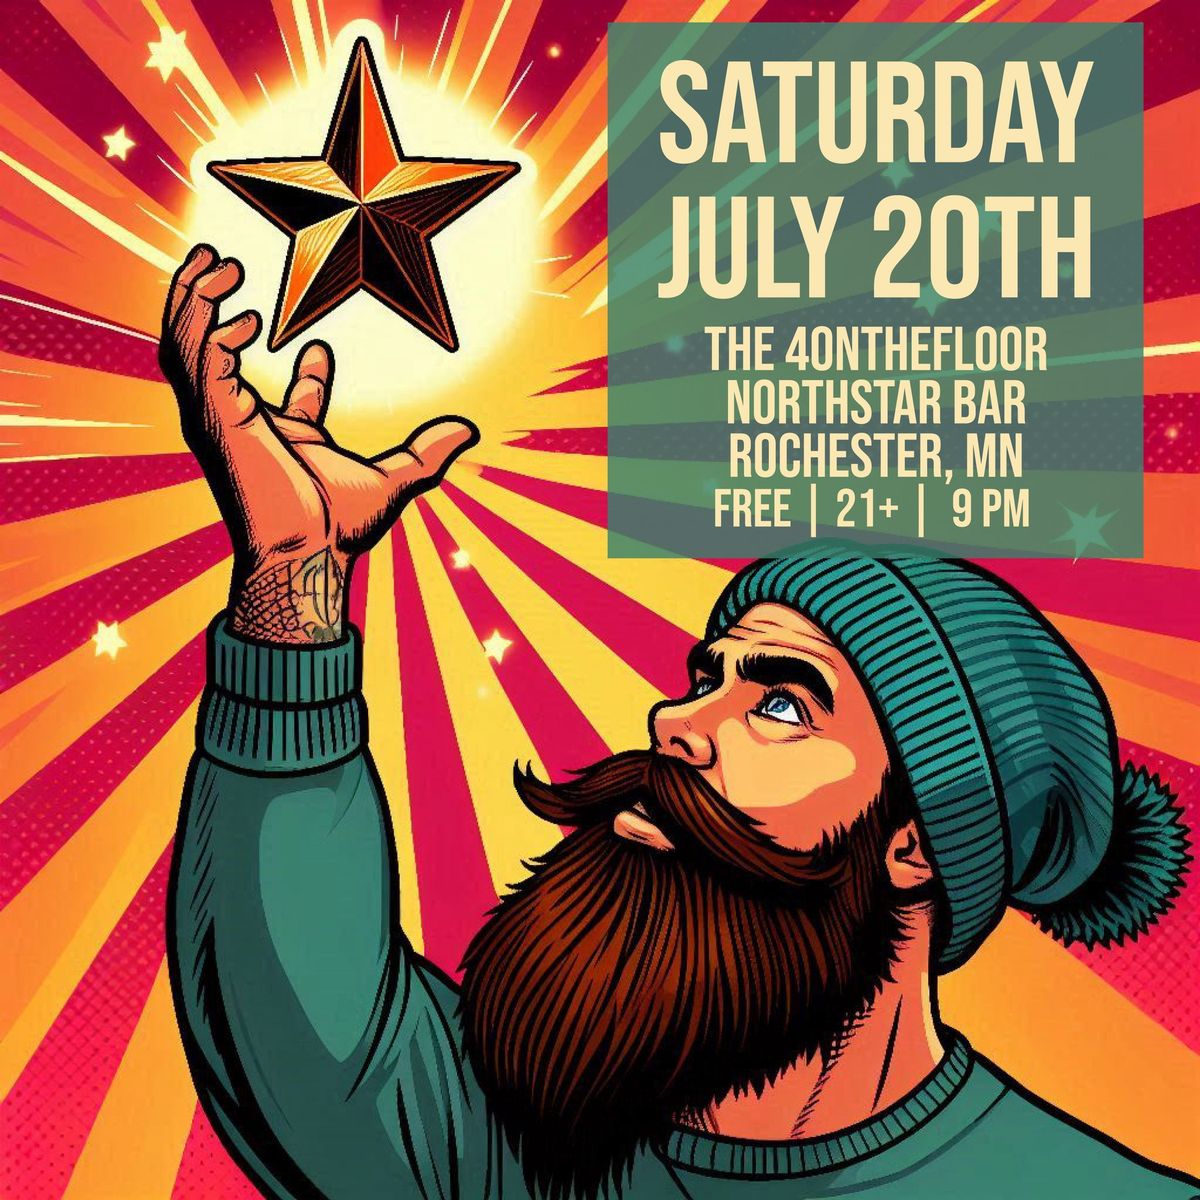 SAT 7.20.24 The 4onthefloor at Rochester, MN (North Star Bar) FREE